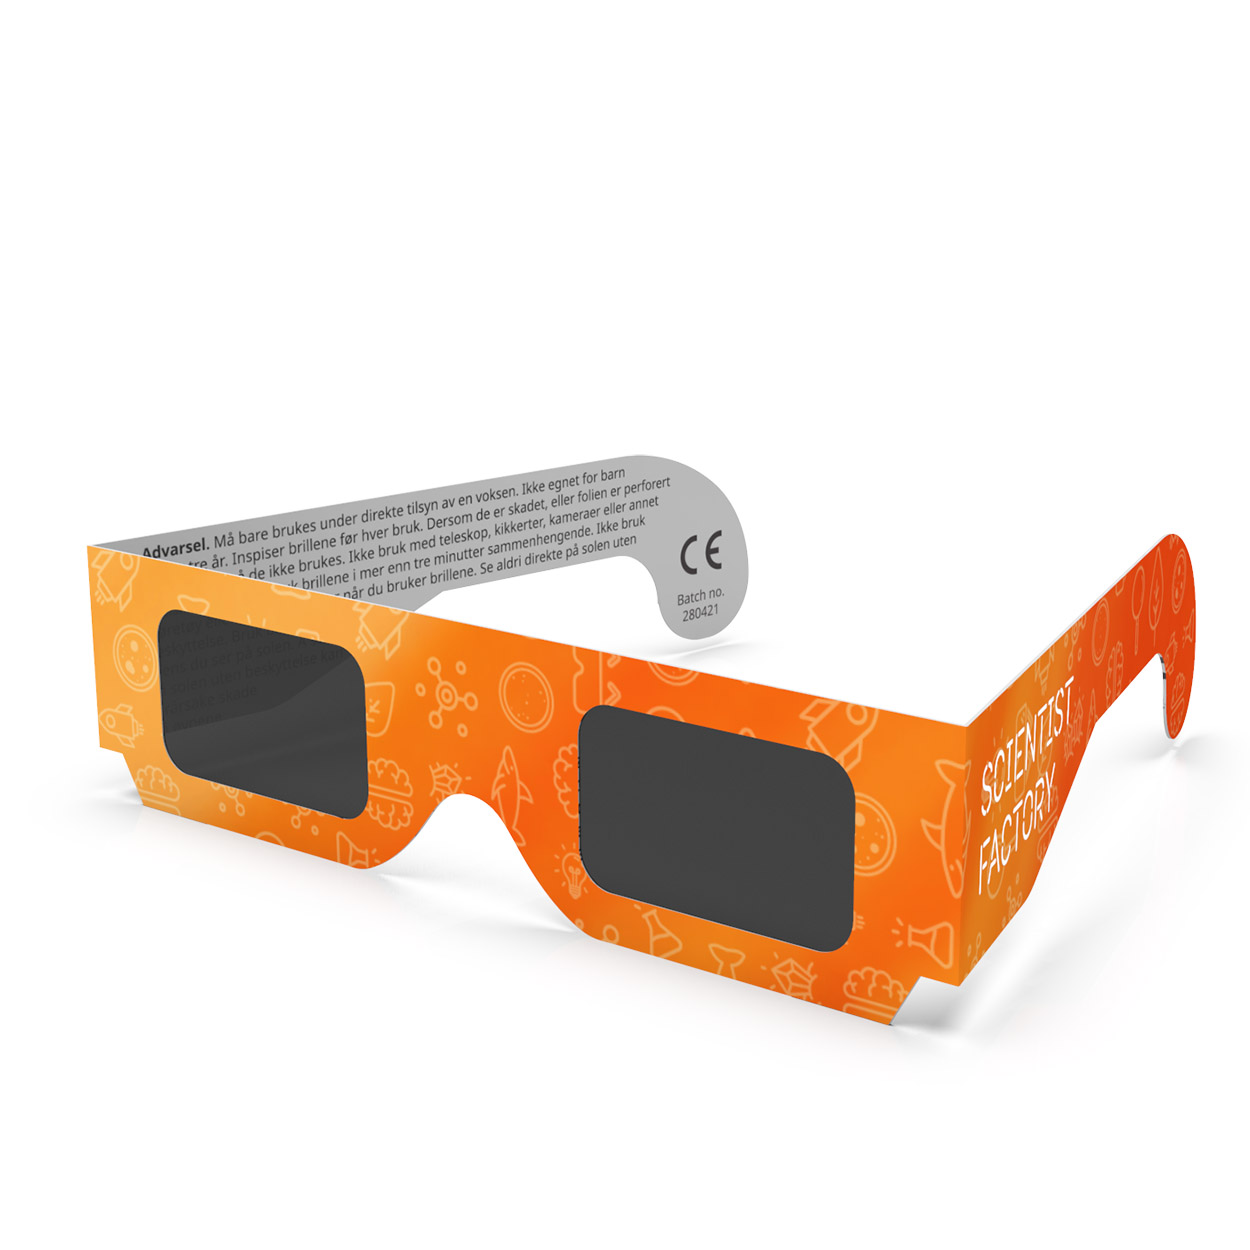 Don't Miss The Solar Eclipse: Order Your Glasses Now!